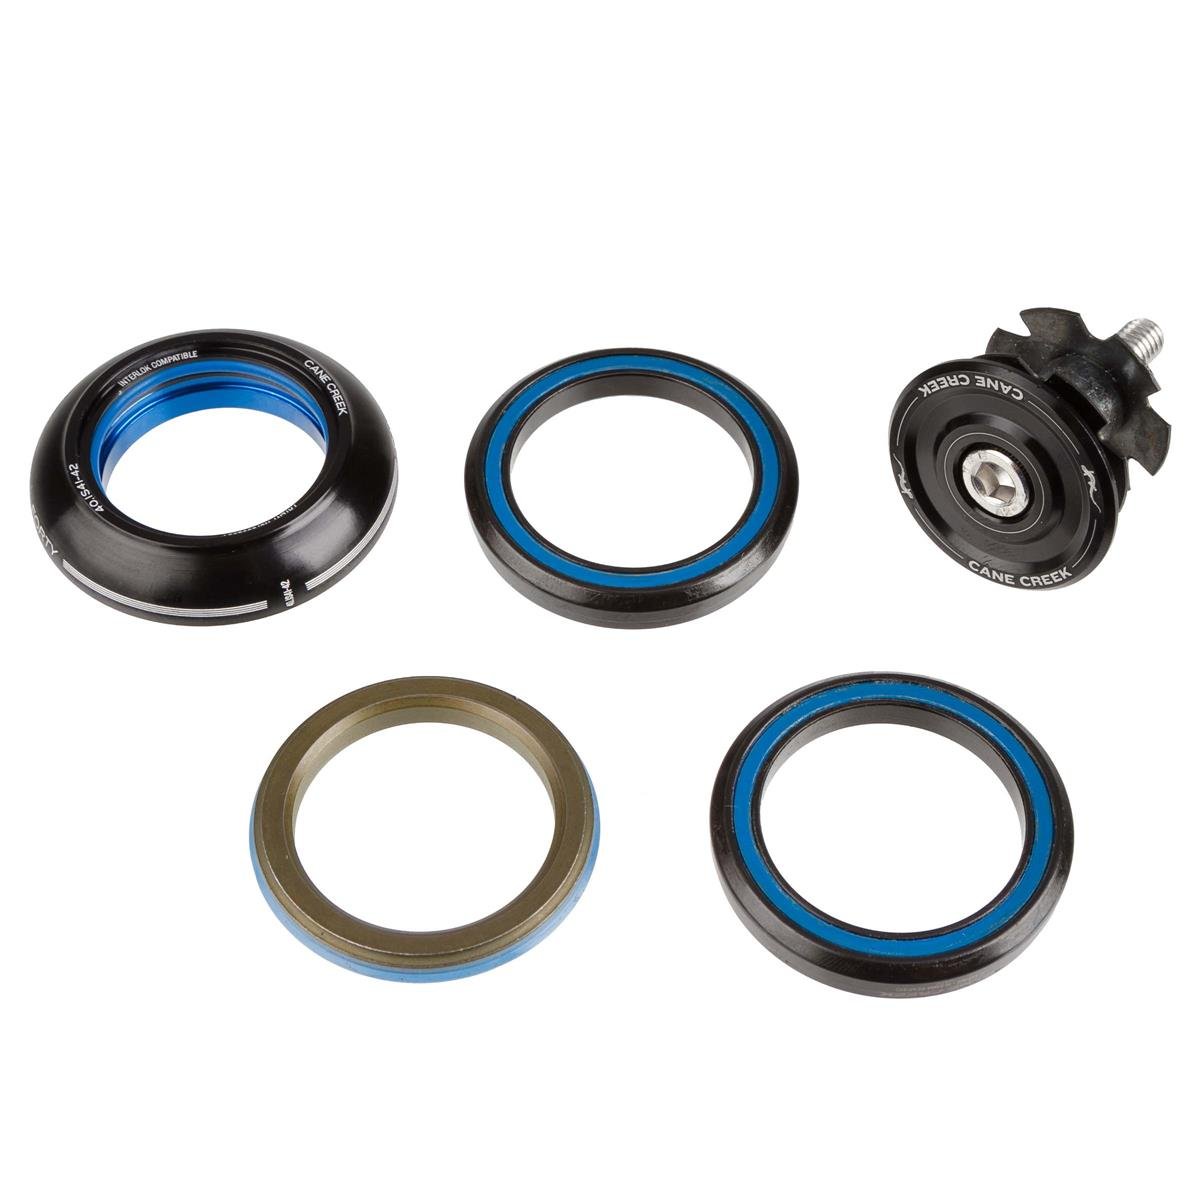 Cane Creek Headset 40 IS42/28.6 | IS42/30, Short, 1 1/8